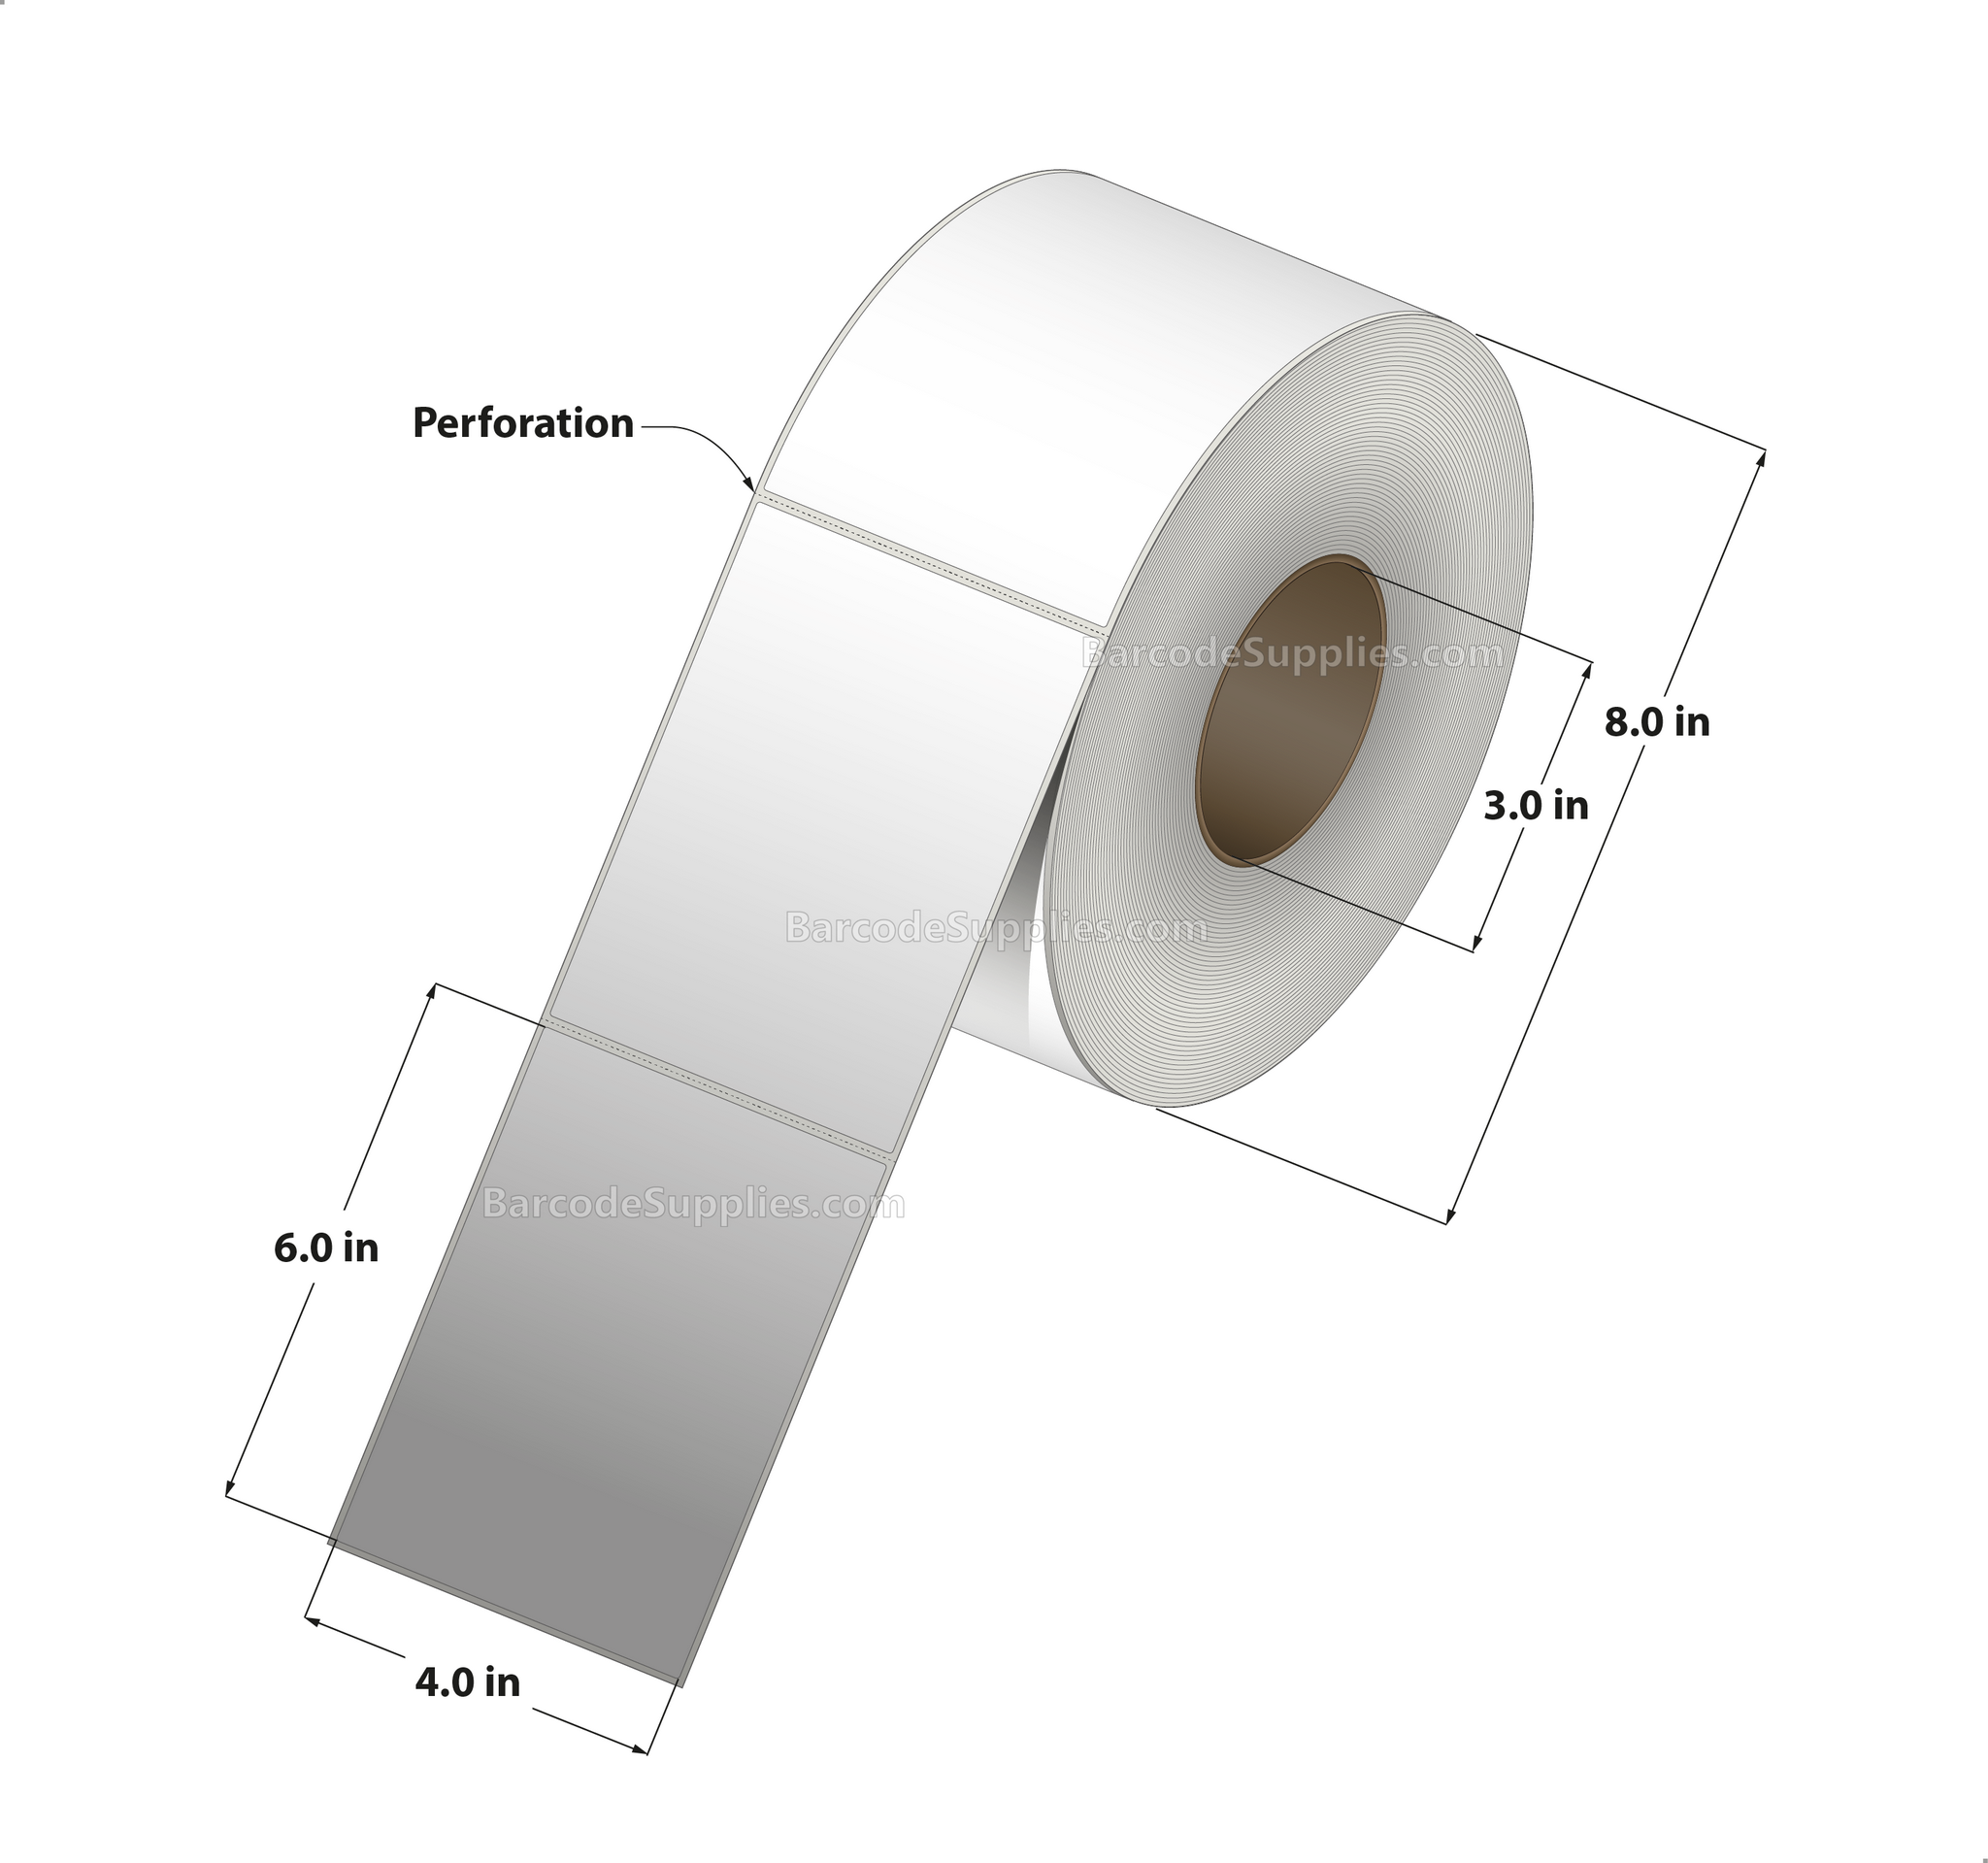 4 x 6 Thermal Transfer White Labels With Removable Adhesive - Perforated - 1000 Labels Per Roll - Carton Of 4 Rolls - 4000 Labels Total - MPN: RE-4-6-1000-3